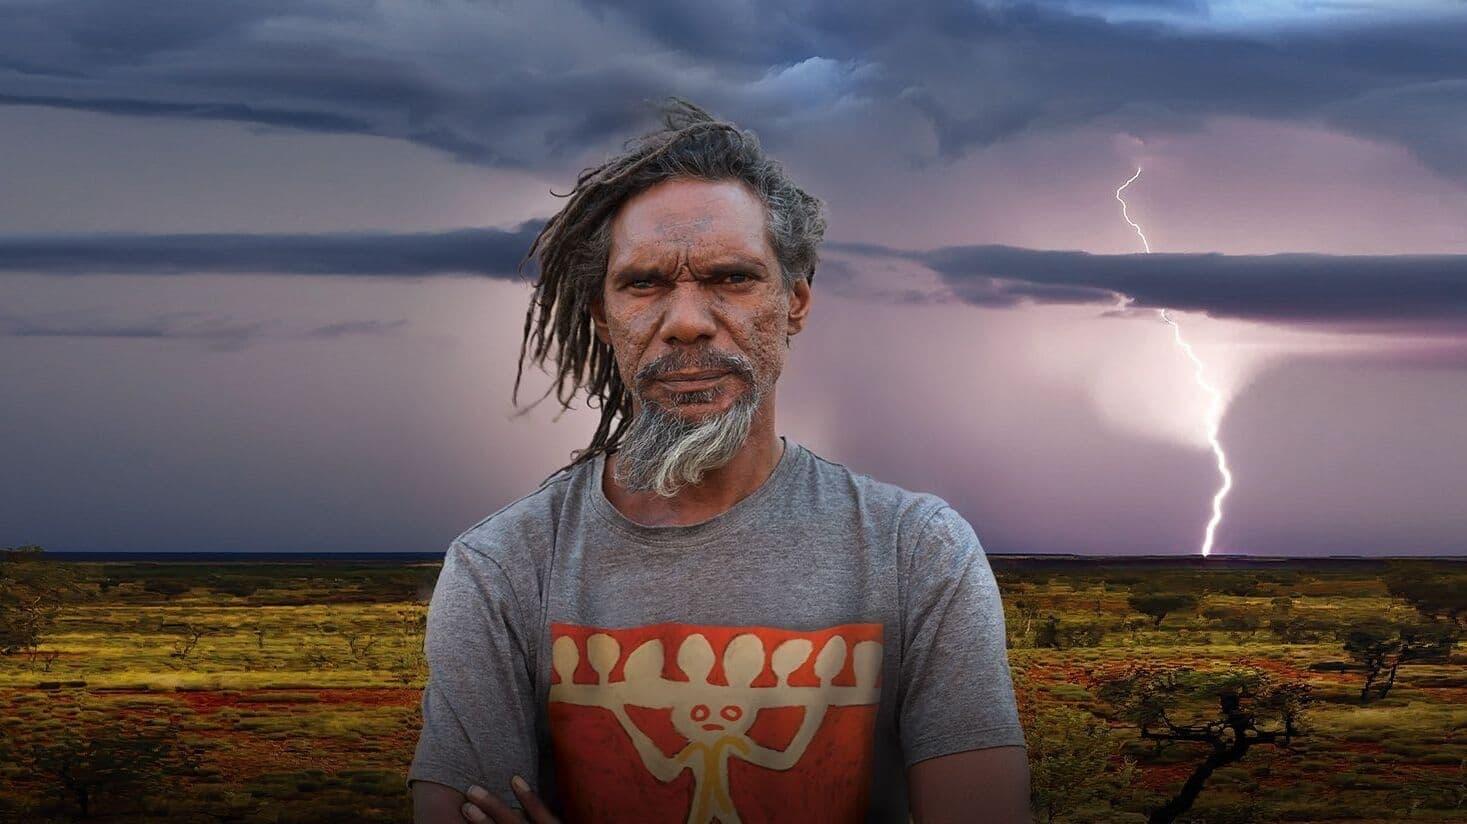 Putuparri and the Rainmakers backdrop